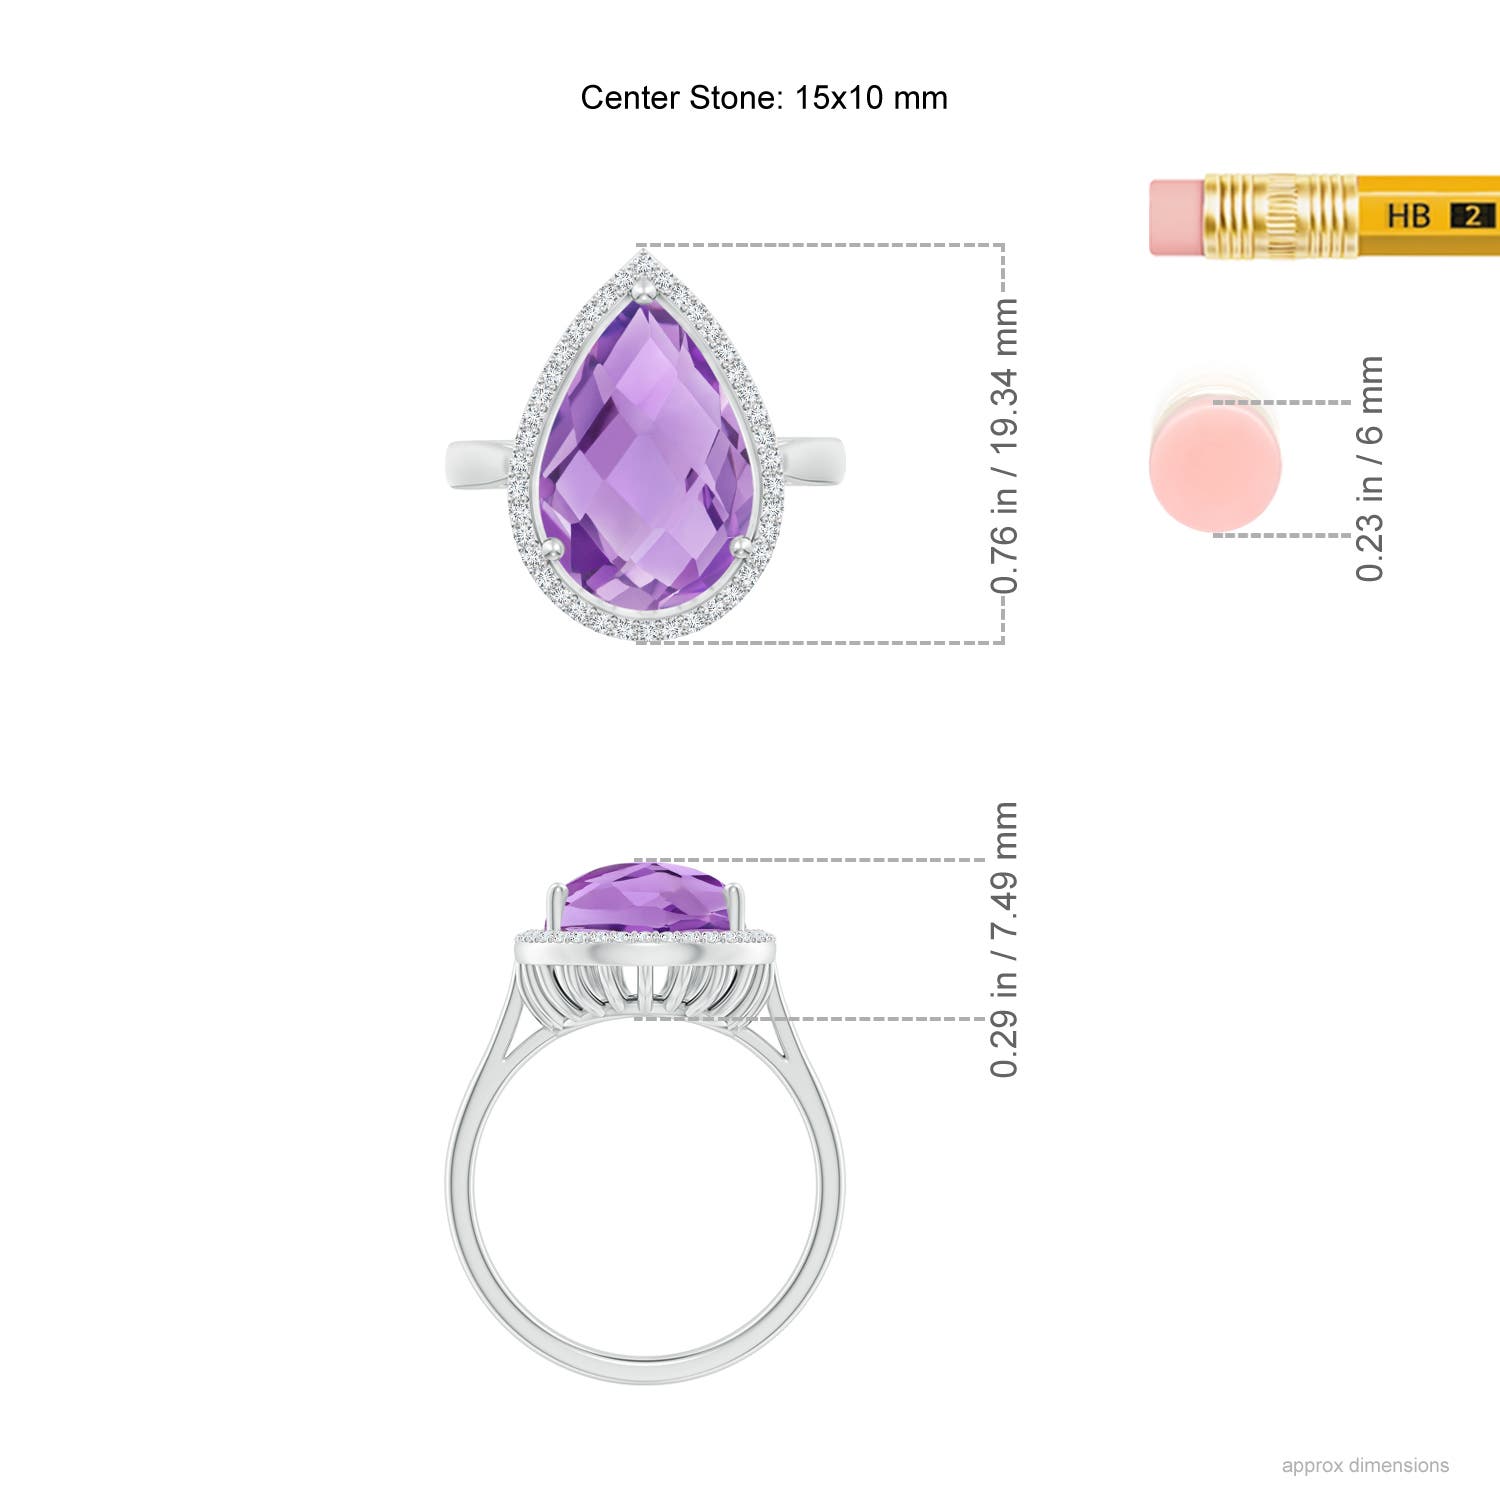 A - Amethyst / 5.1 CT / 14 KT White Gold